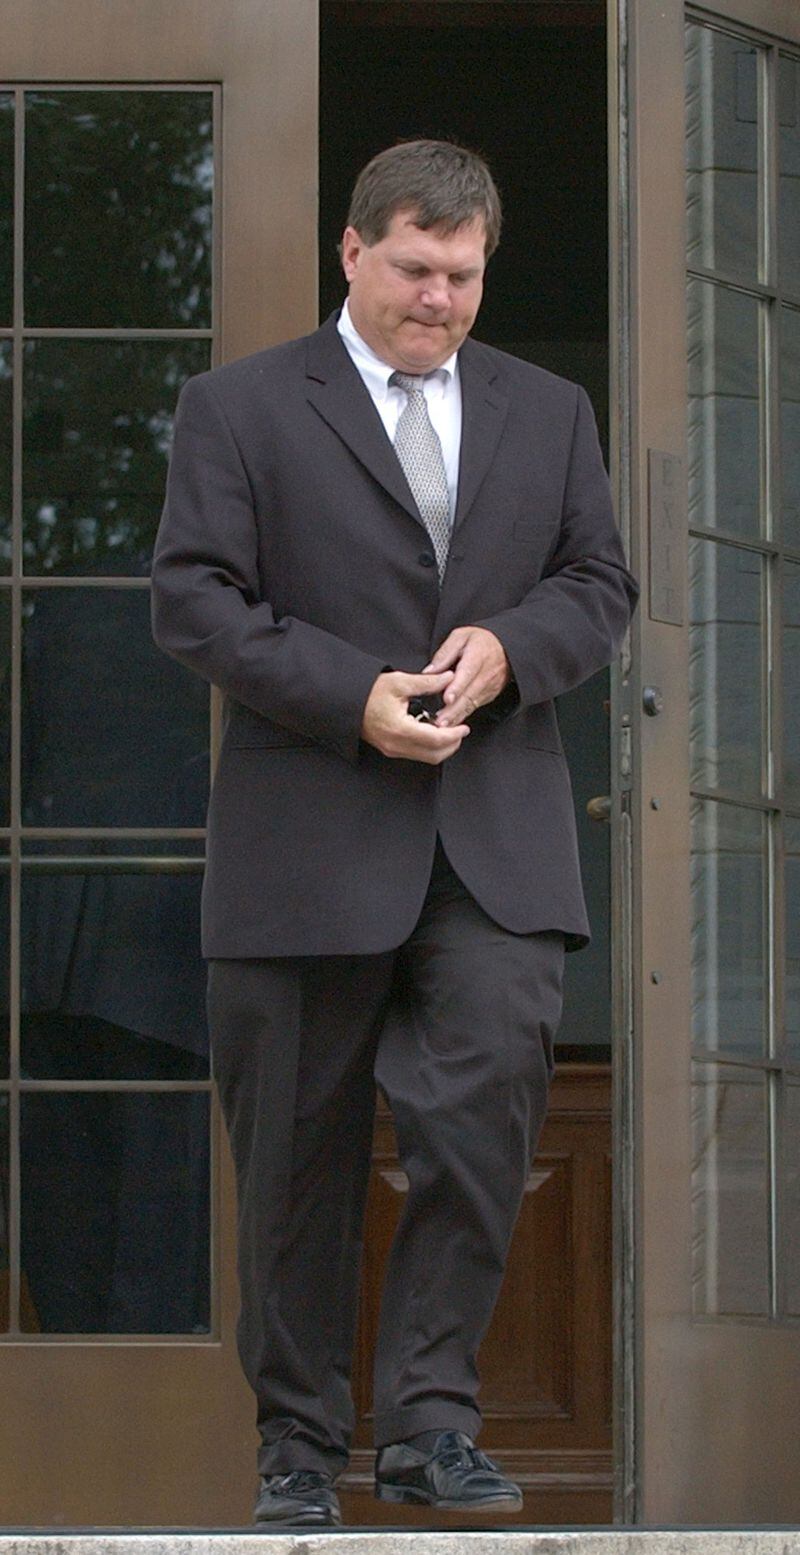 Duncan Fordham leaves the Federal Courthouse in Augusta on June 15, 2004 after an arraignment for conspiracy to commit health fraud. Credit: Chris Thelen/The Augusta Chronicle-USA TODAY NETWORK     